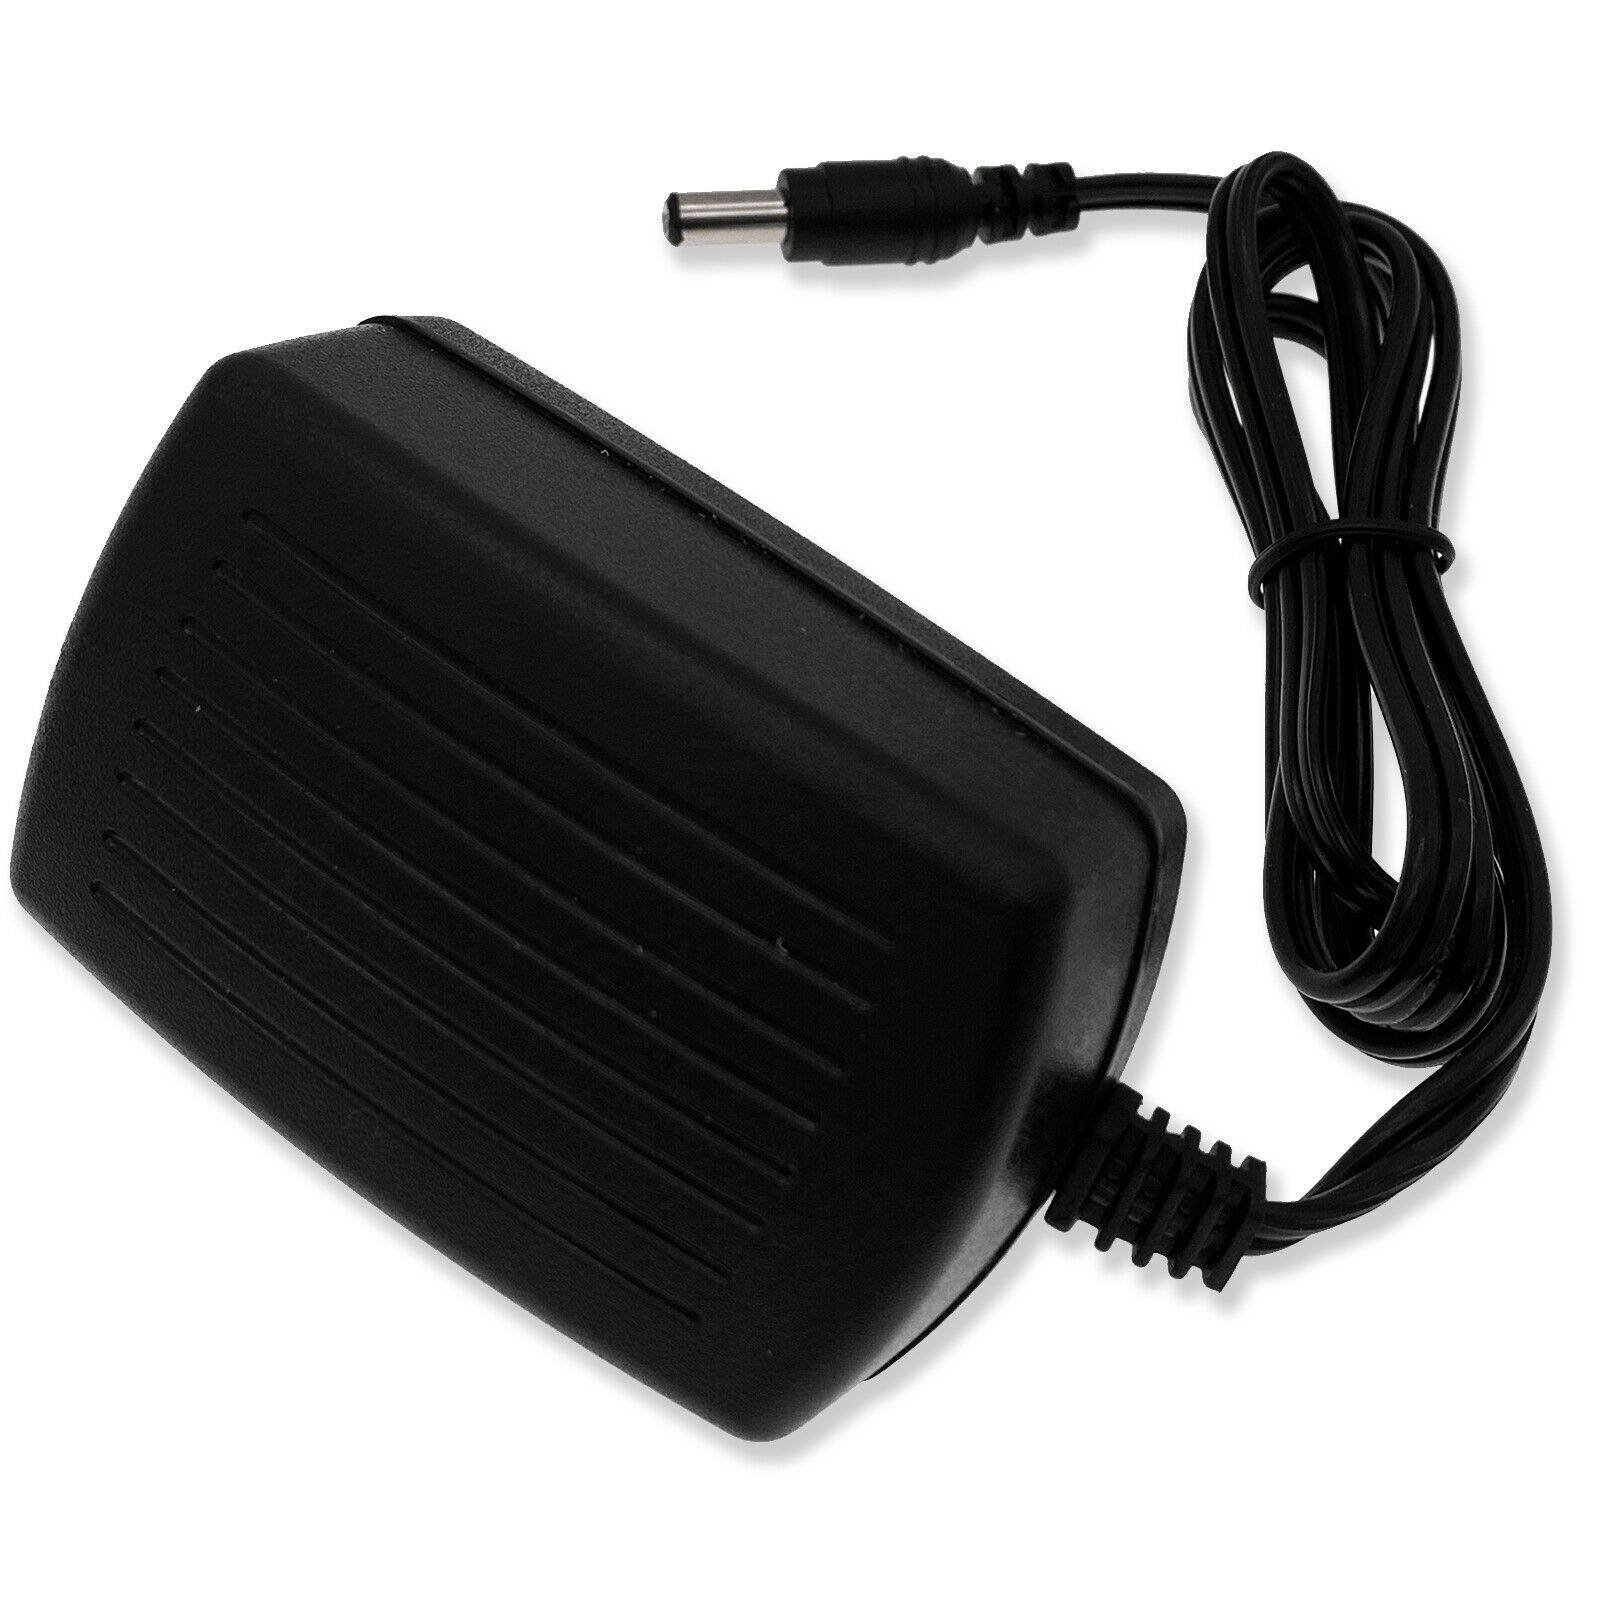 AC Power Adapter For Yamaha PA130 PA150 PA-150B Keyboards Guitars Digital Drums Brand Unbranded Color Black Compat - Click Image to Close